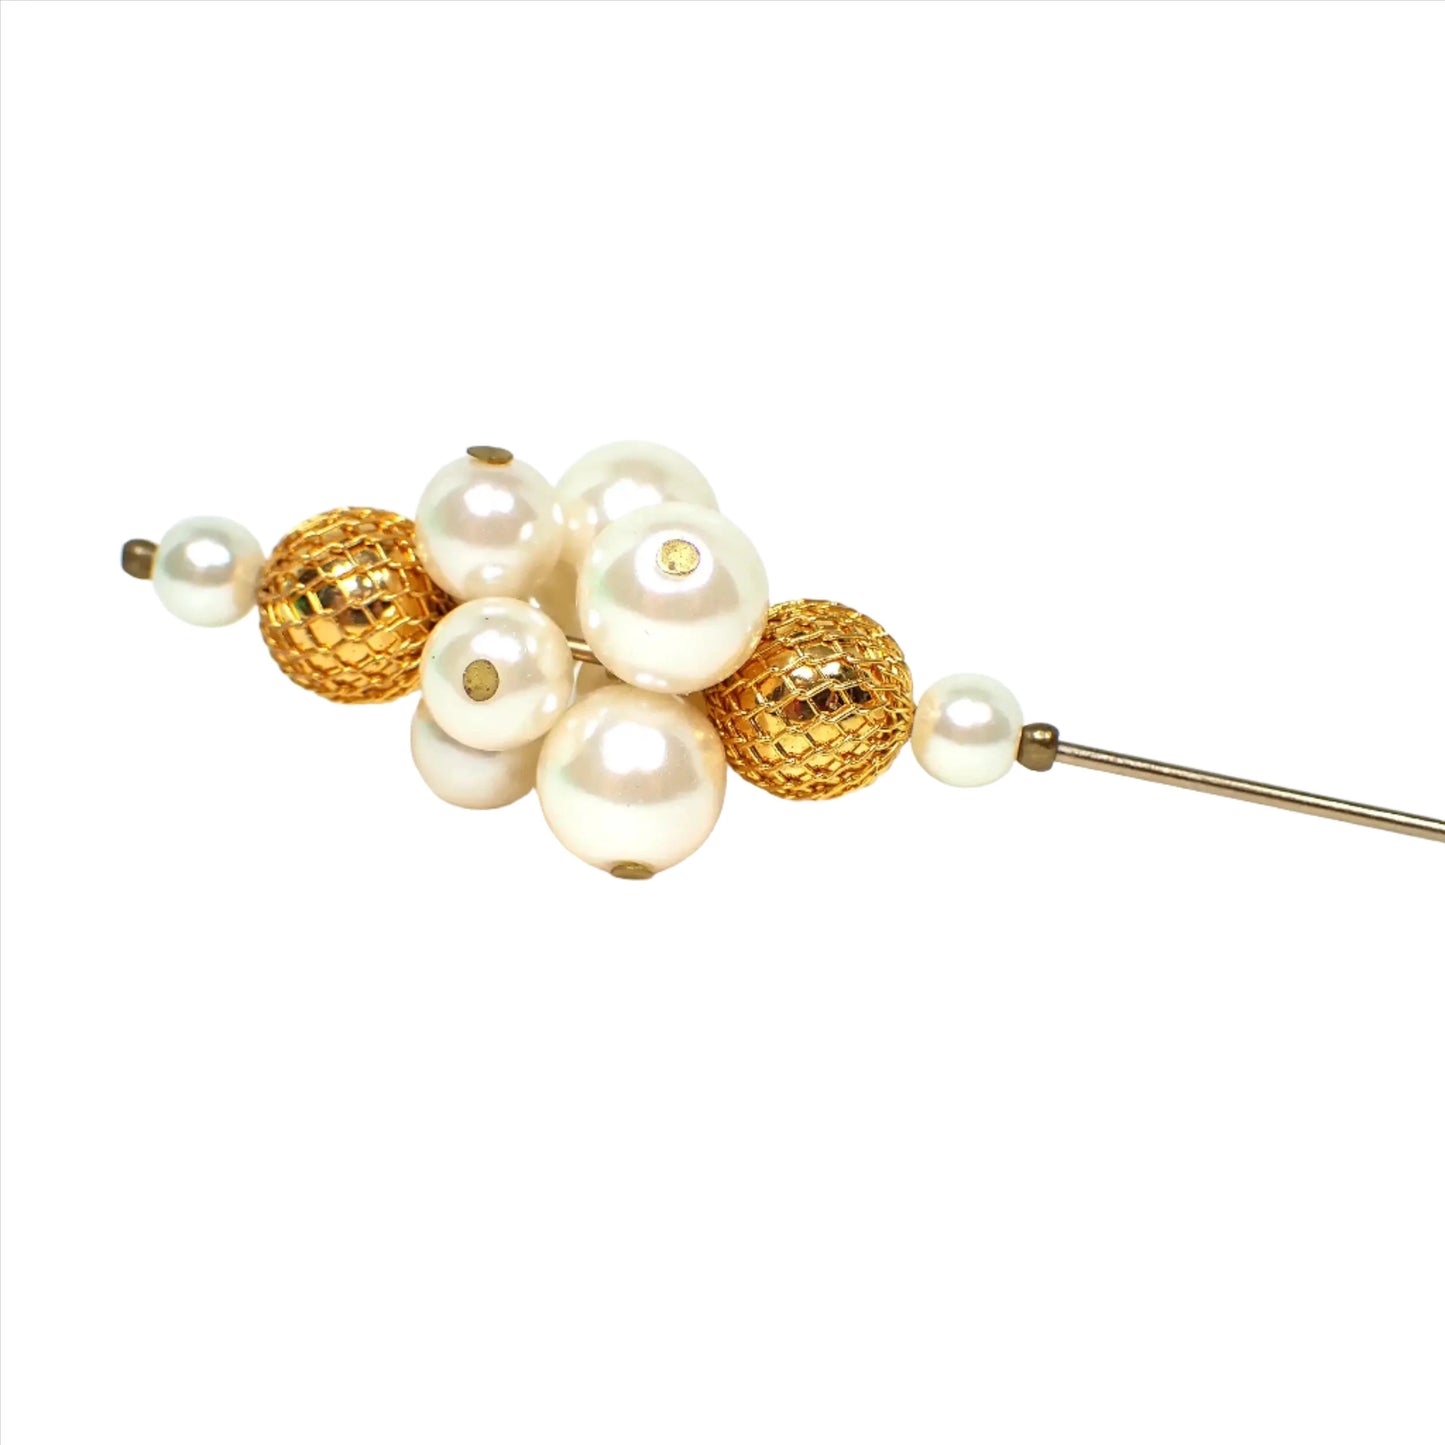 Enlarged view of the top of the retro vintage hat pin. There are faux pearl plastic beads in pearly  round beads at the top and bottom of the beaded area and a cluster of white faux pearl beads in the middle. The faux pearl beads are separated by textured gold tone round beads. You can see my reflection taking the photo in areas of the gold tone plated beads.